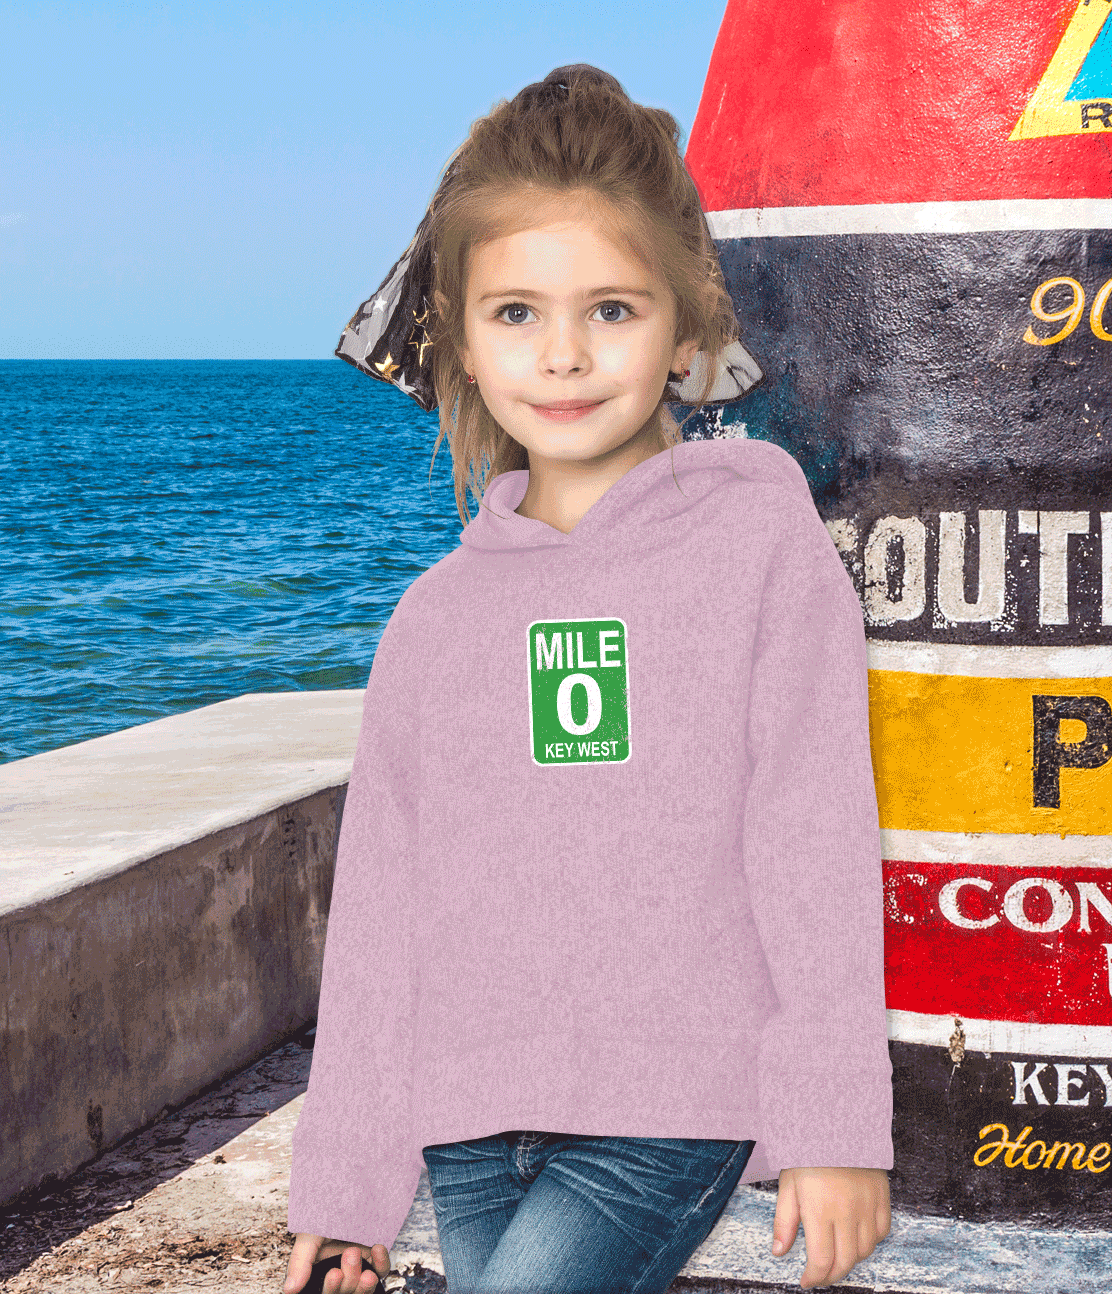 Key West Mile 0 Youth Hoodie Souvenir Gift - My Destination Location